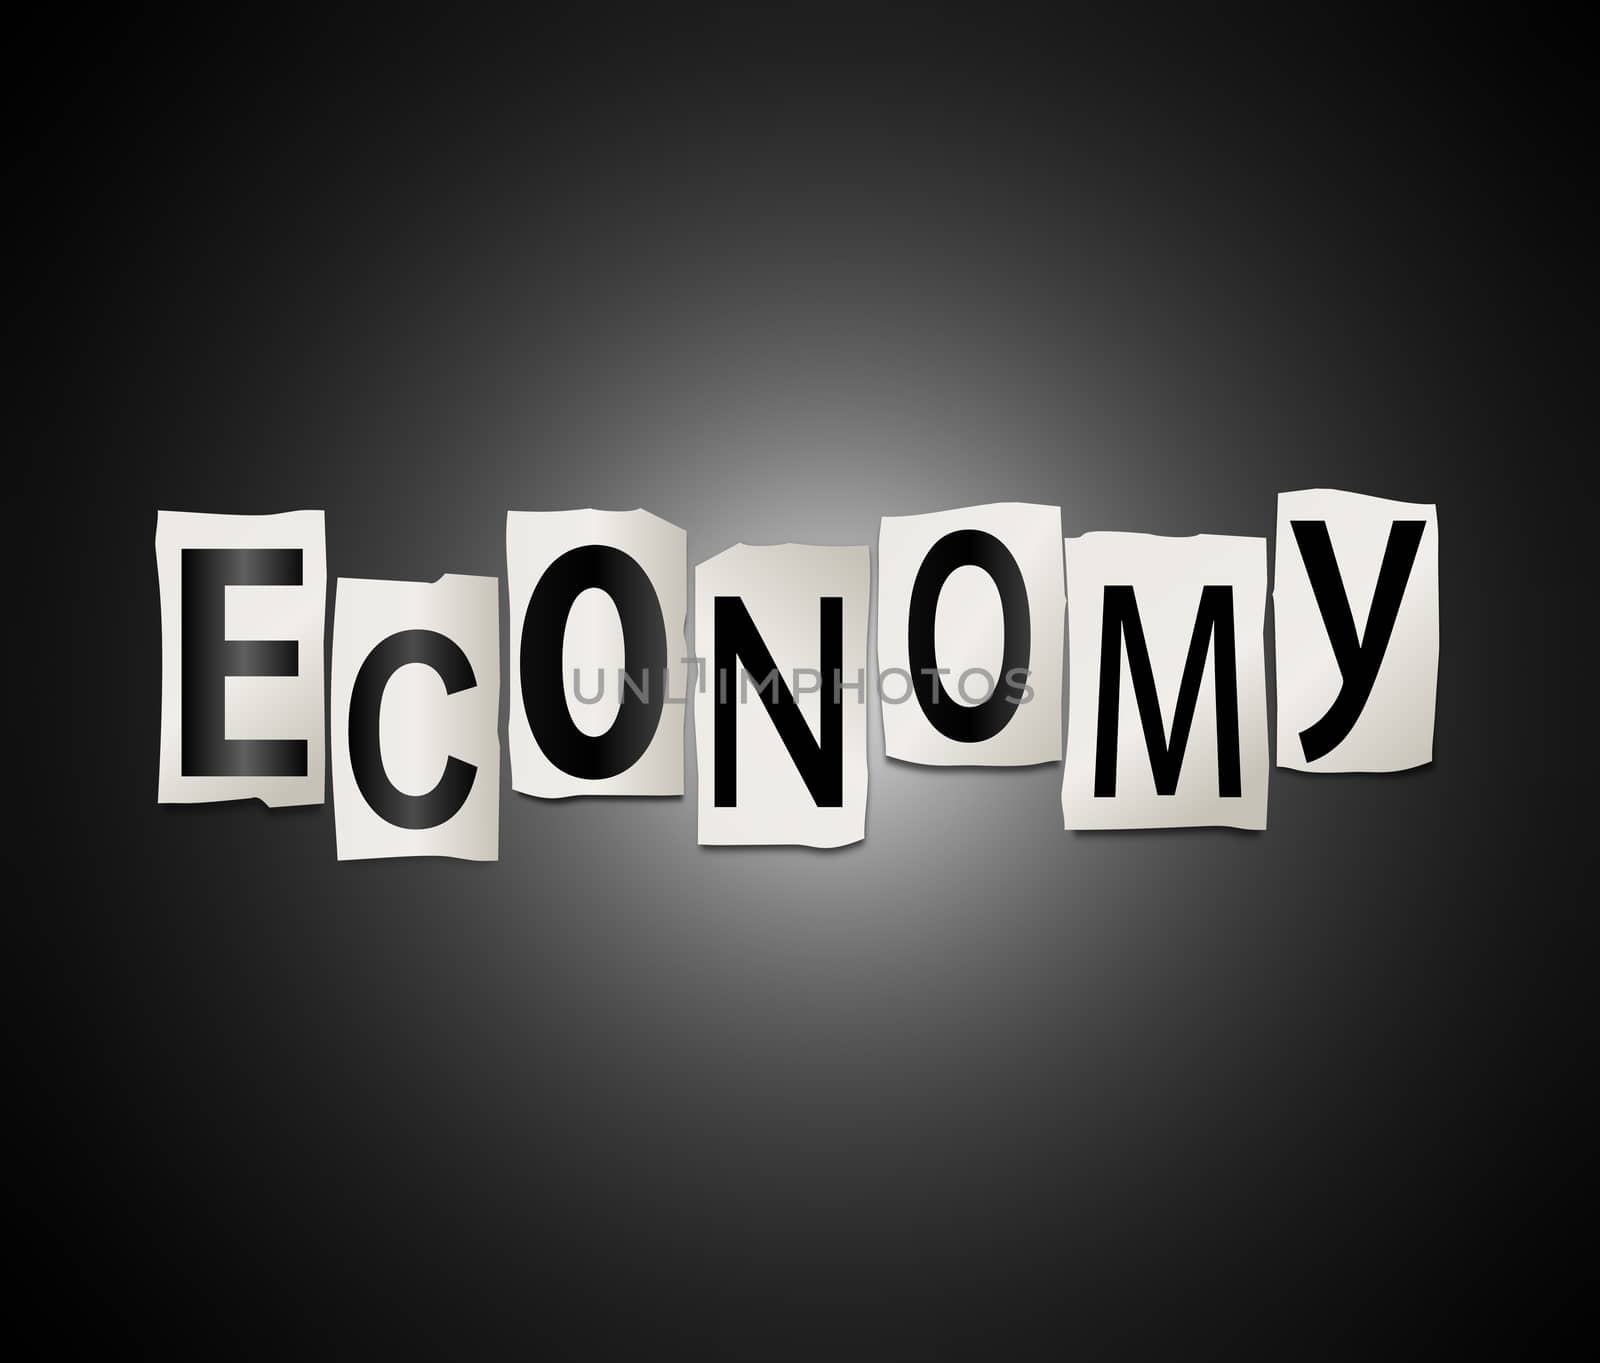 Illustration depicting a set of cut out printed letters arranged to form the word economy.